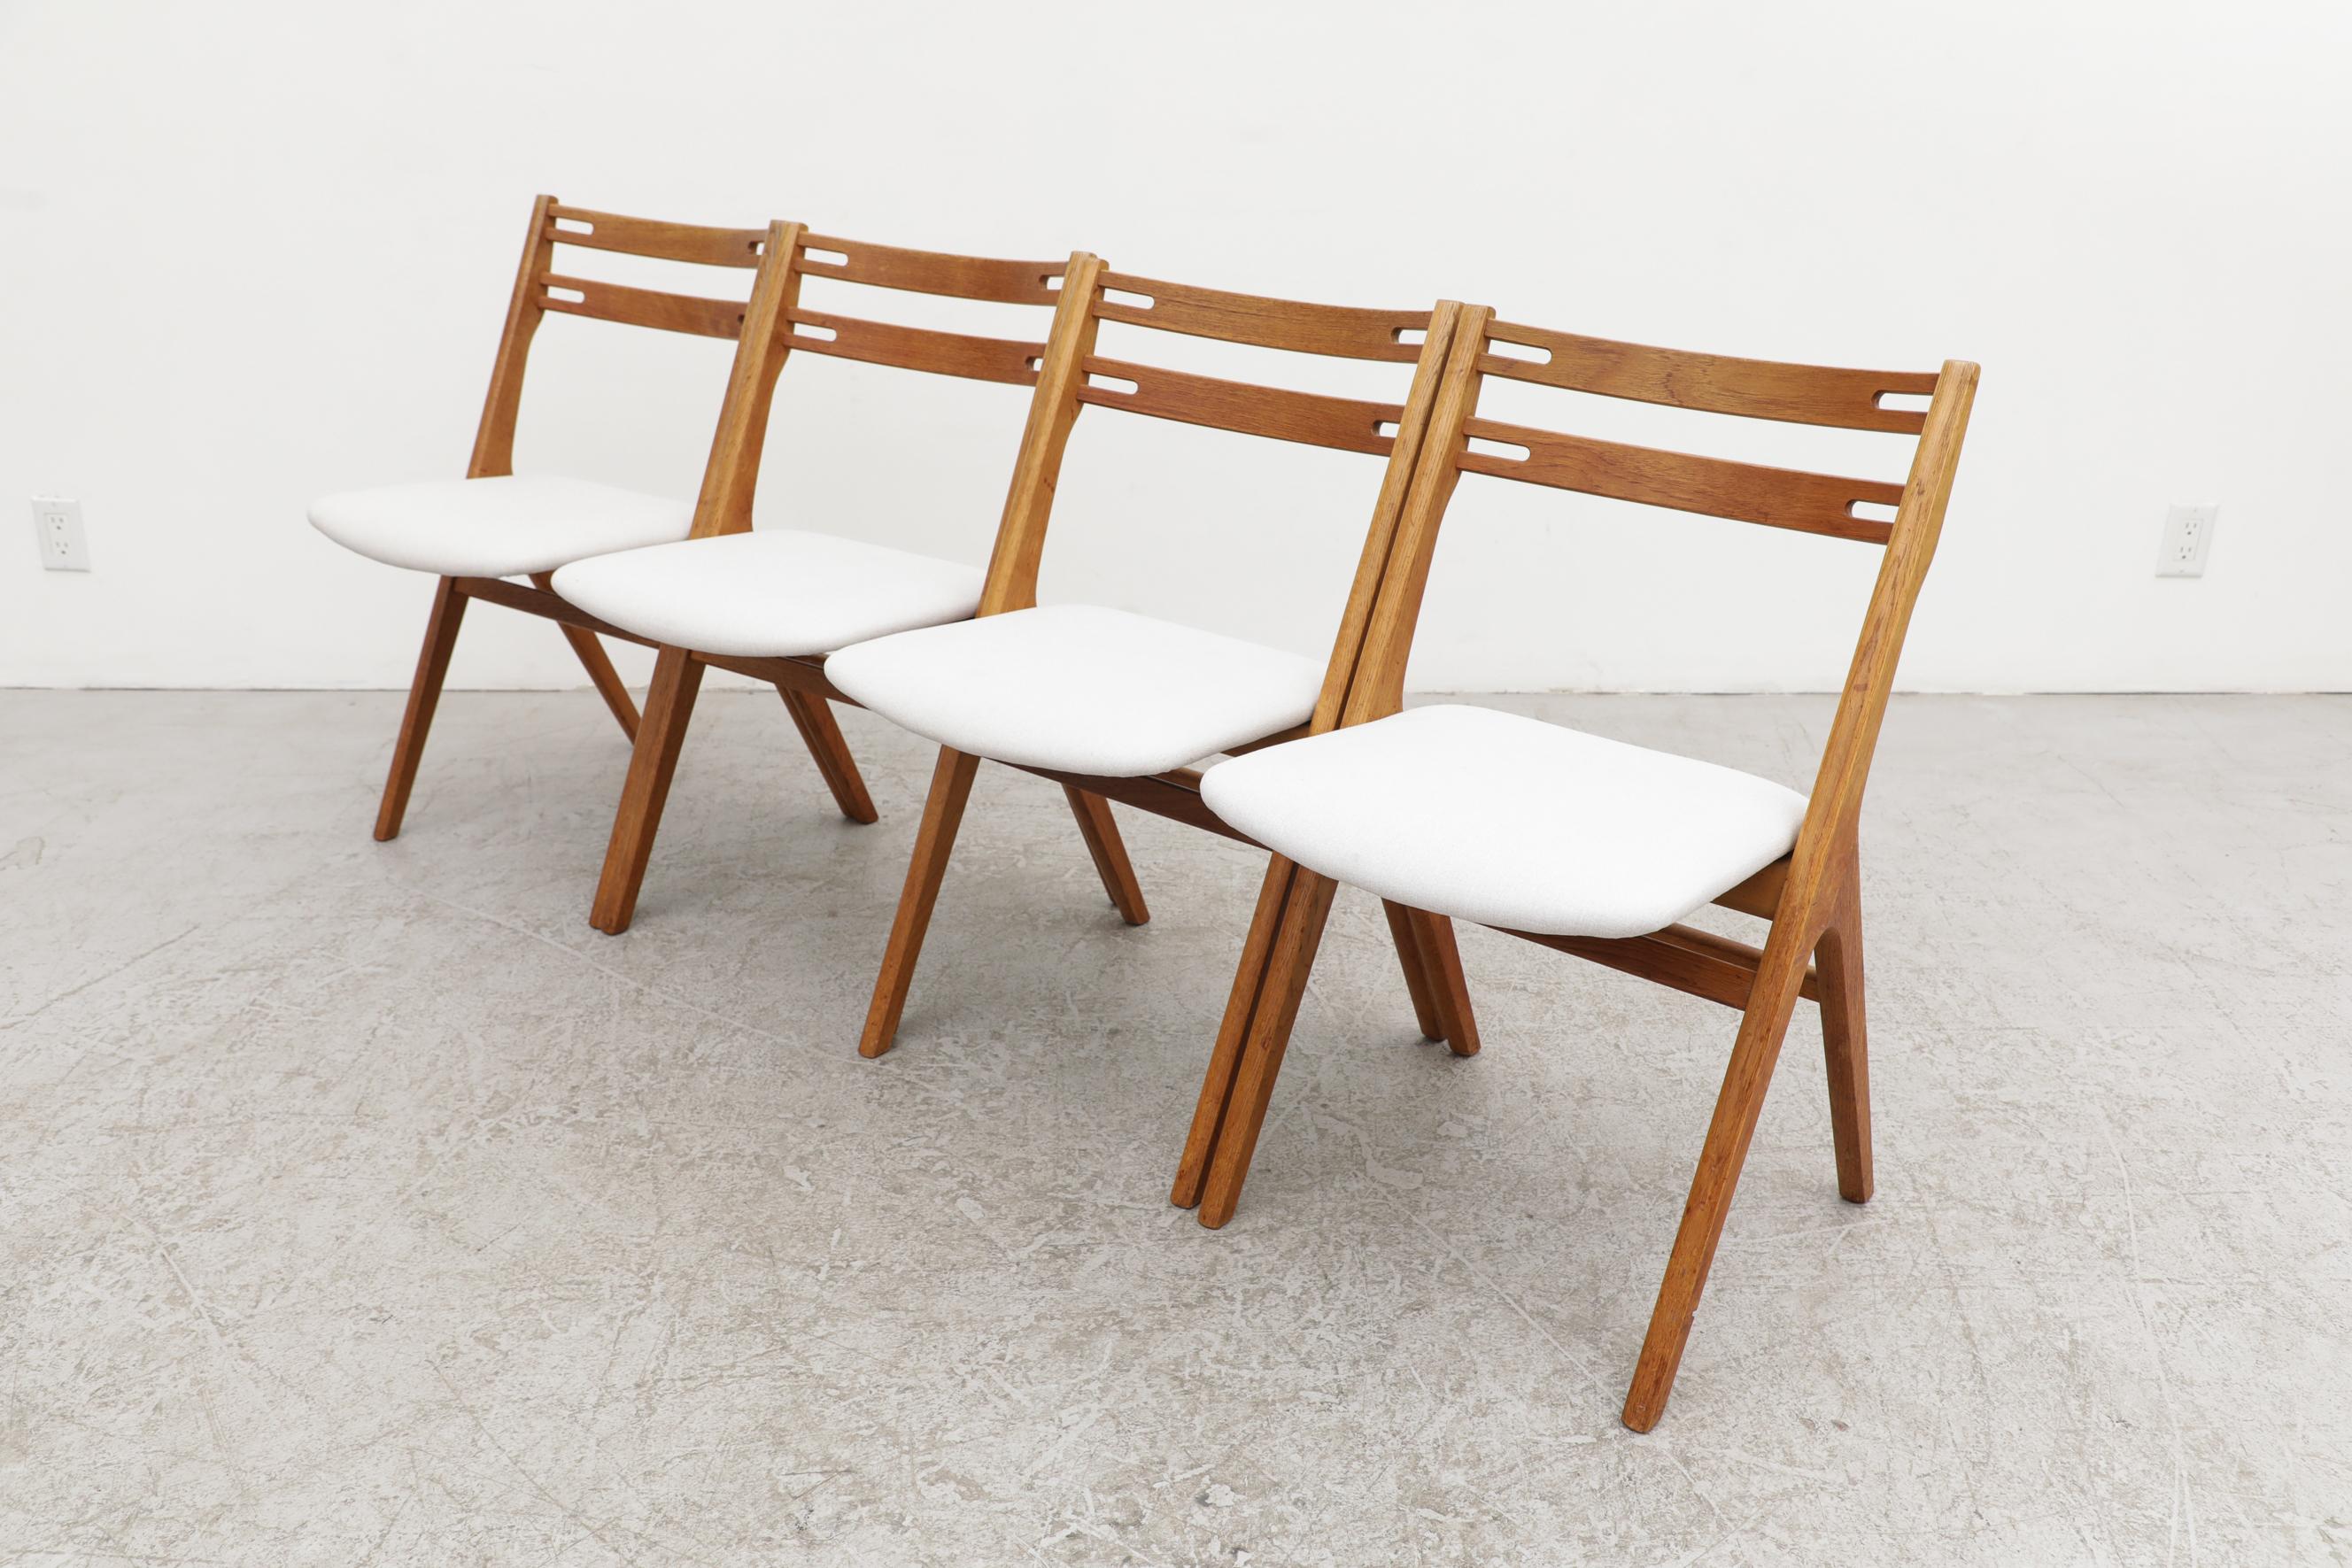 Danish Set of 4 Hans Wegner Inspired Oak Dining Chairs by Sibast with White Seats For Sale